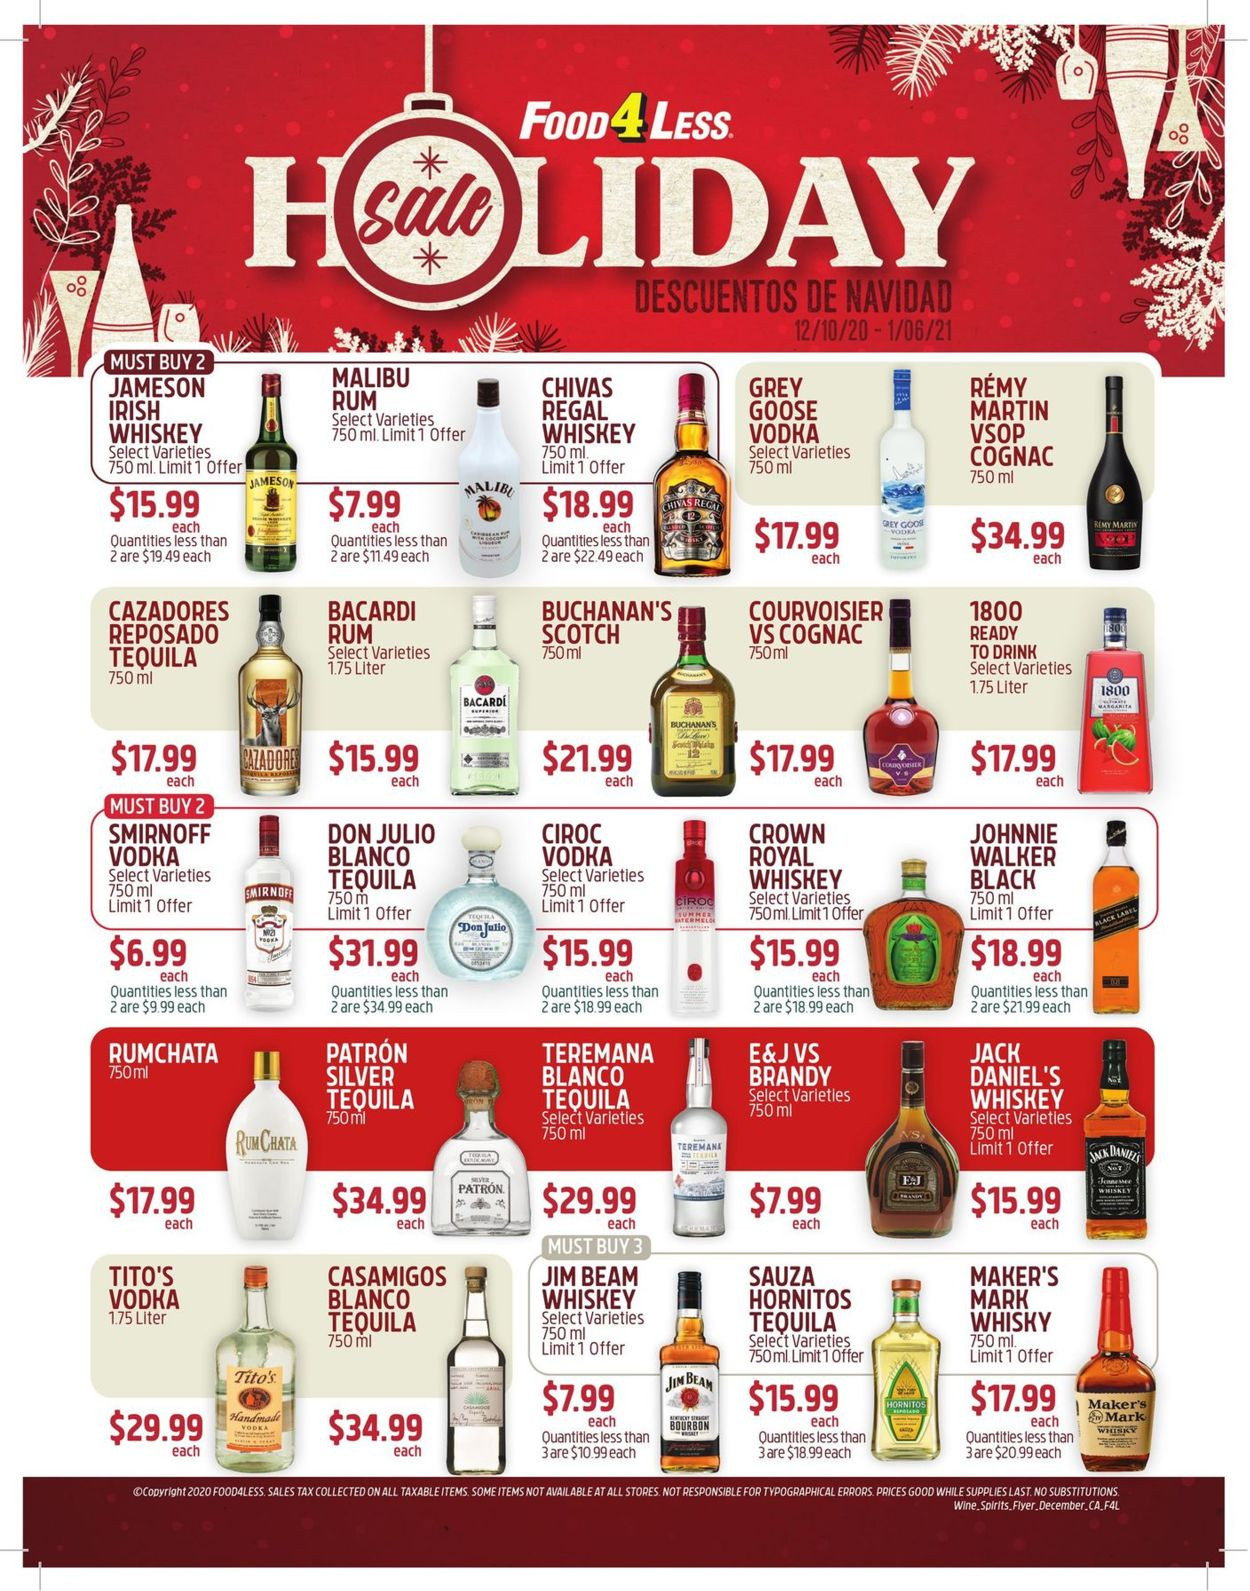 Food 4 Less Holiday Sale 2020 Current Weekly Ad 12/10 - 01-Food Holidays For 2021